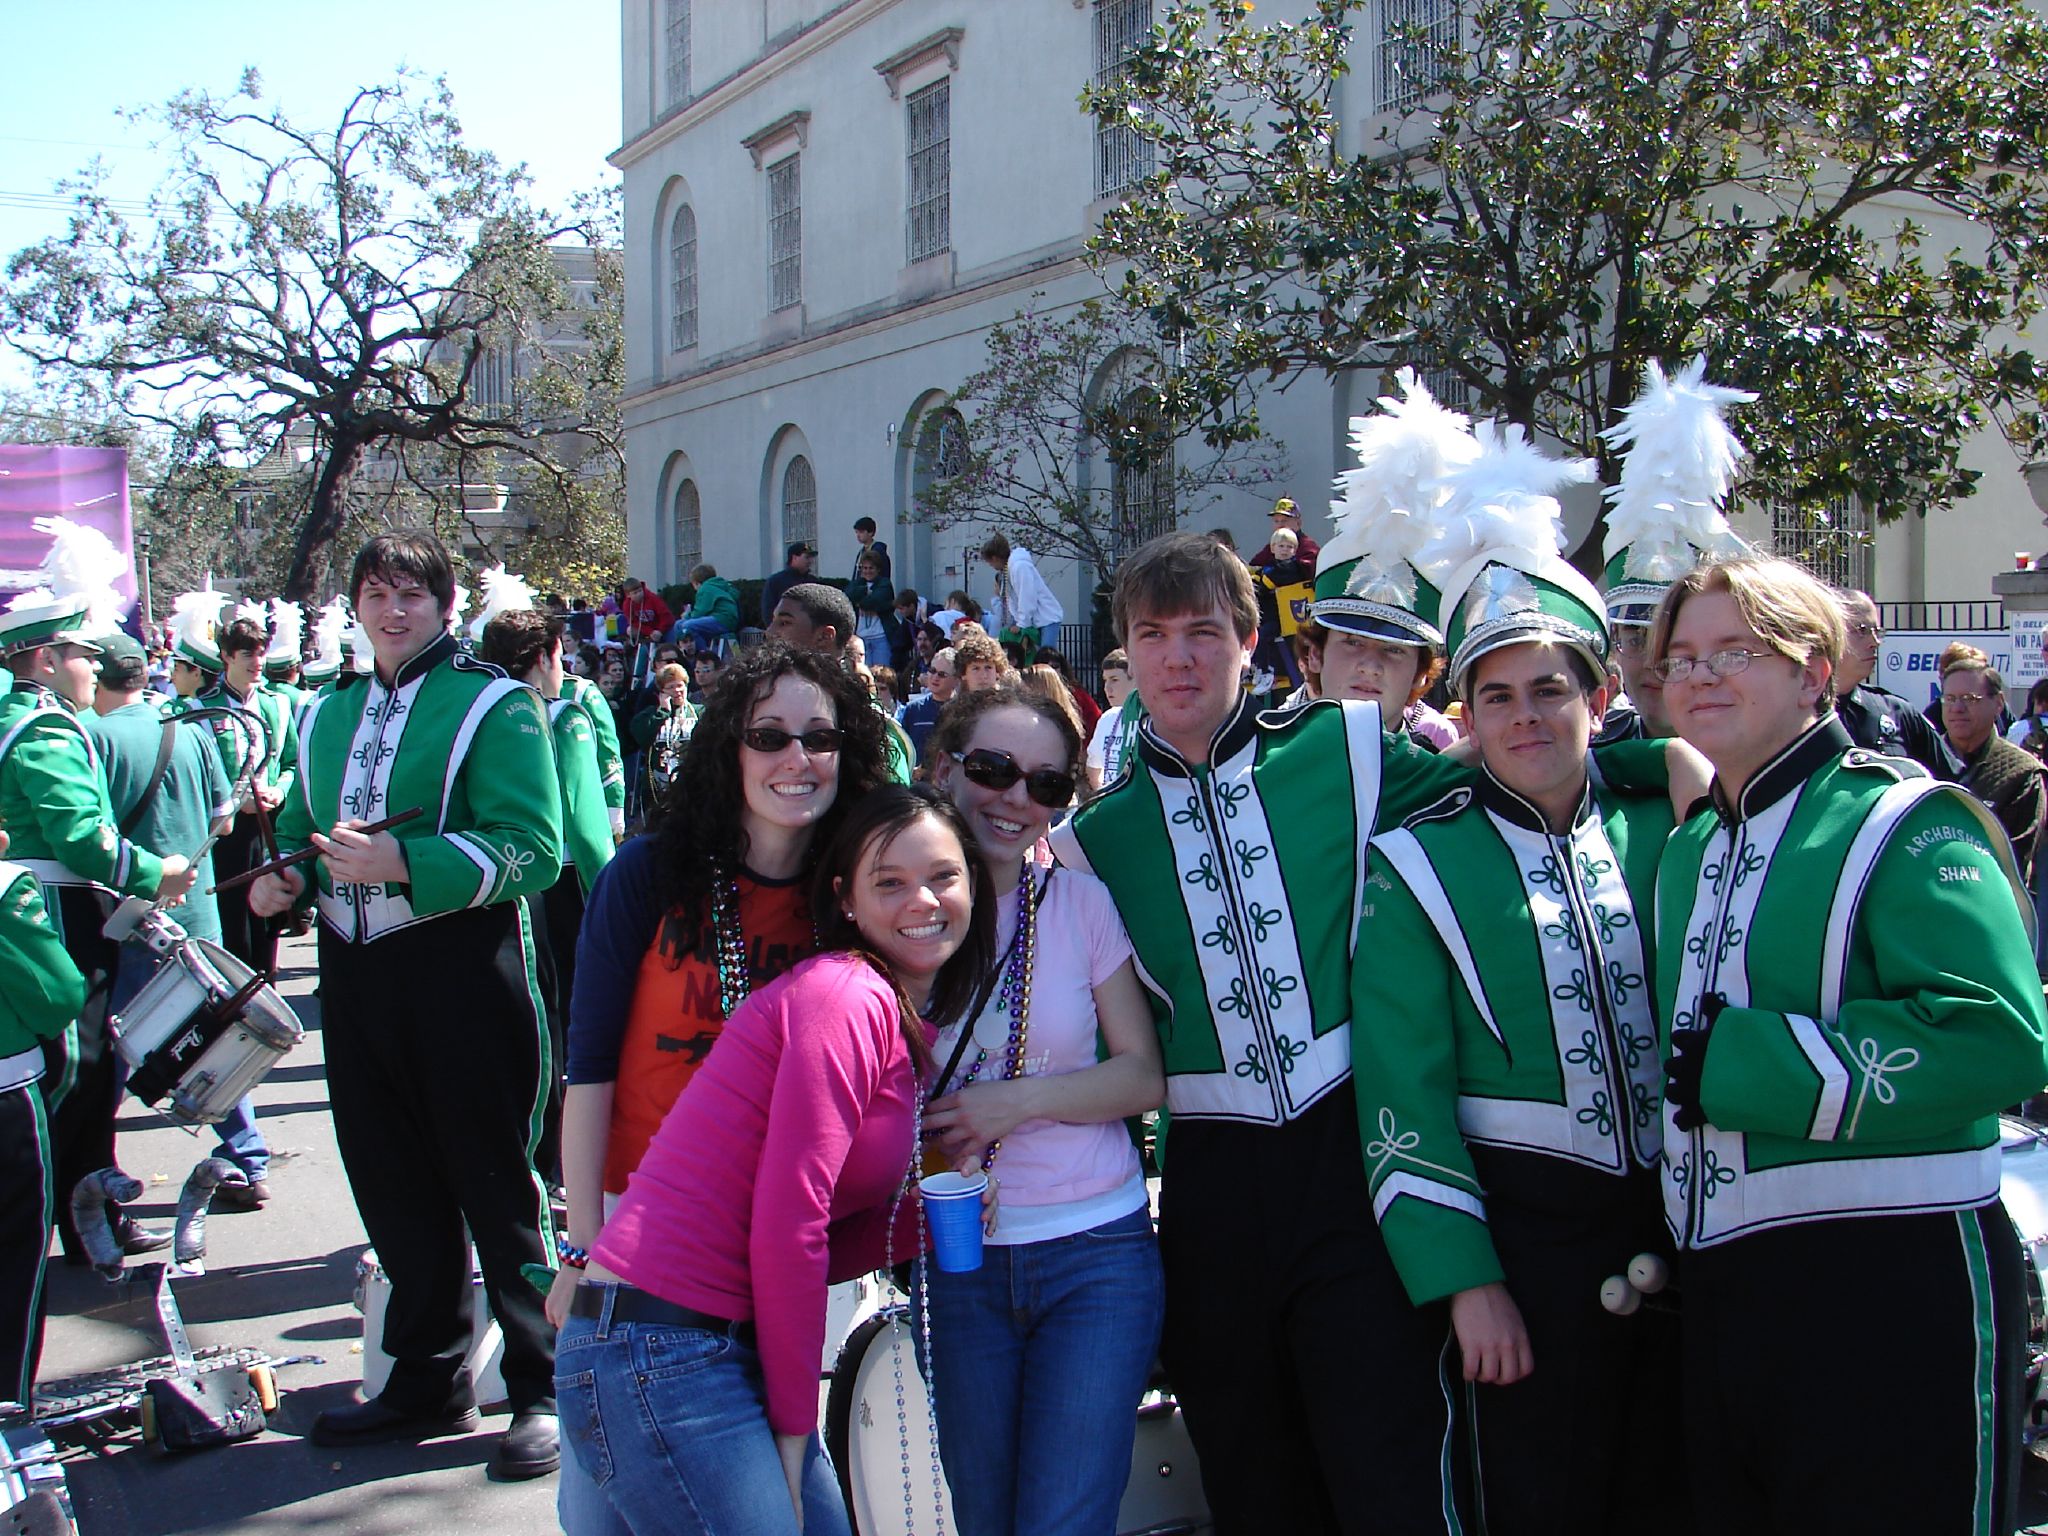 people gathered together with green and white outfits